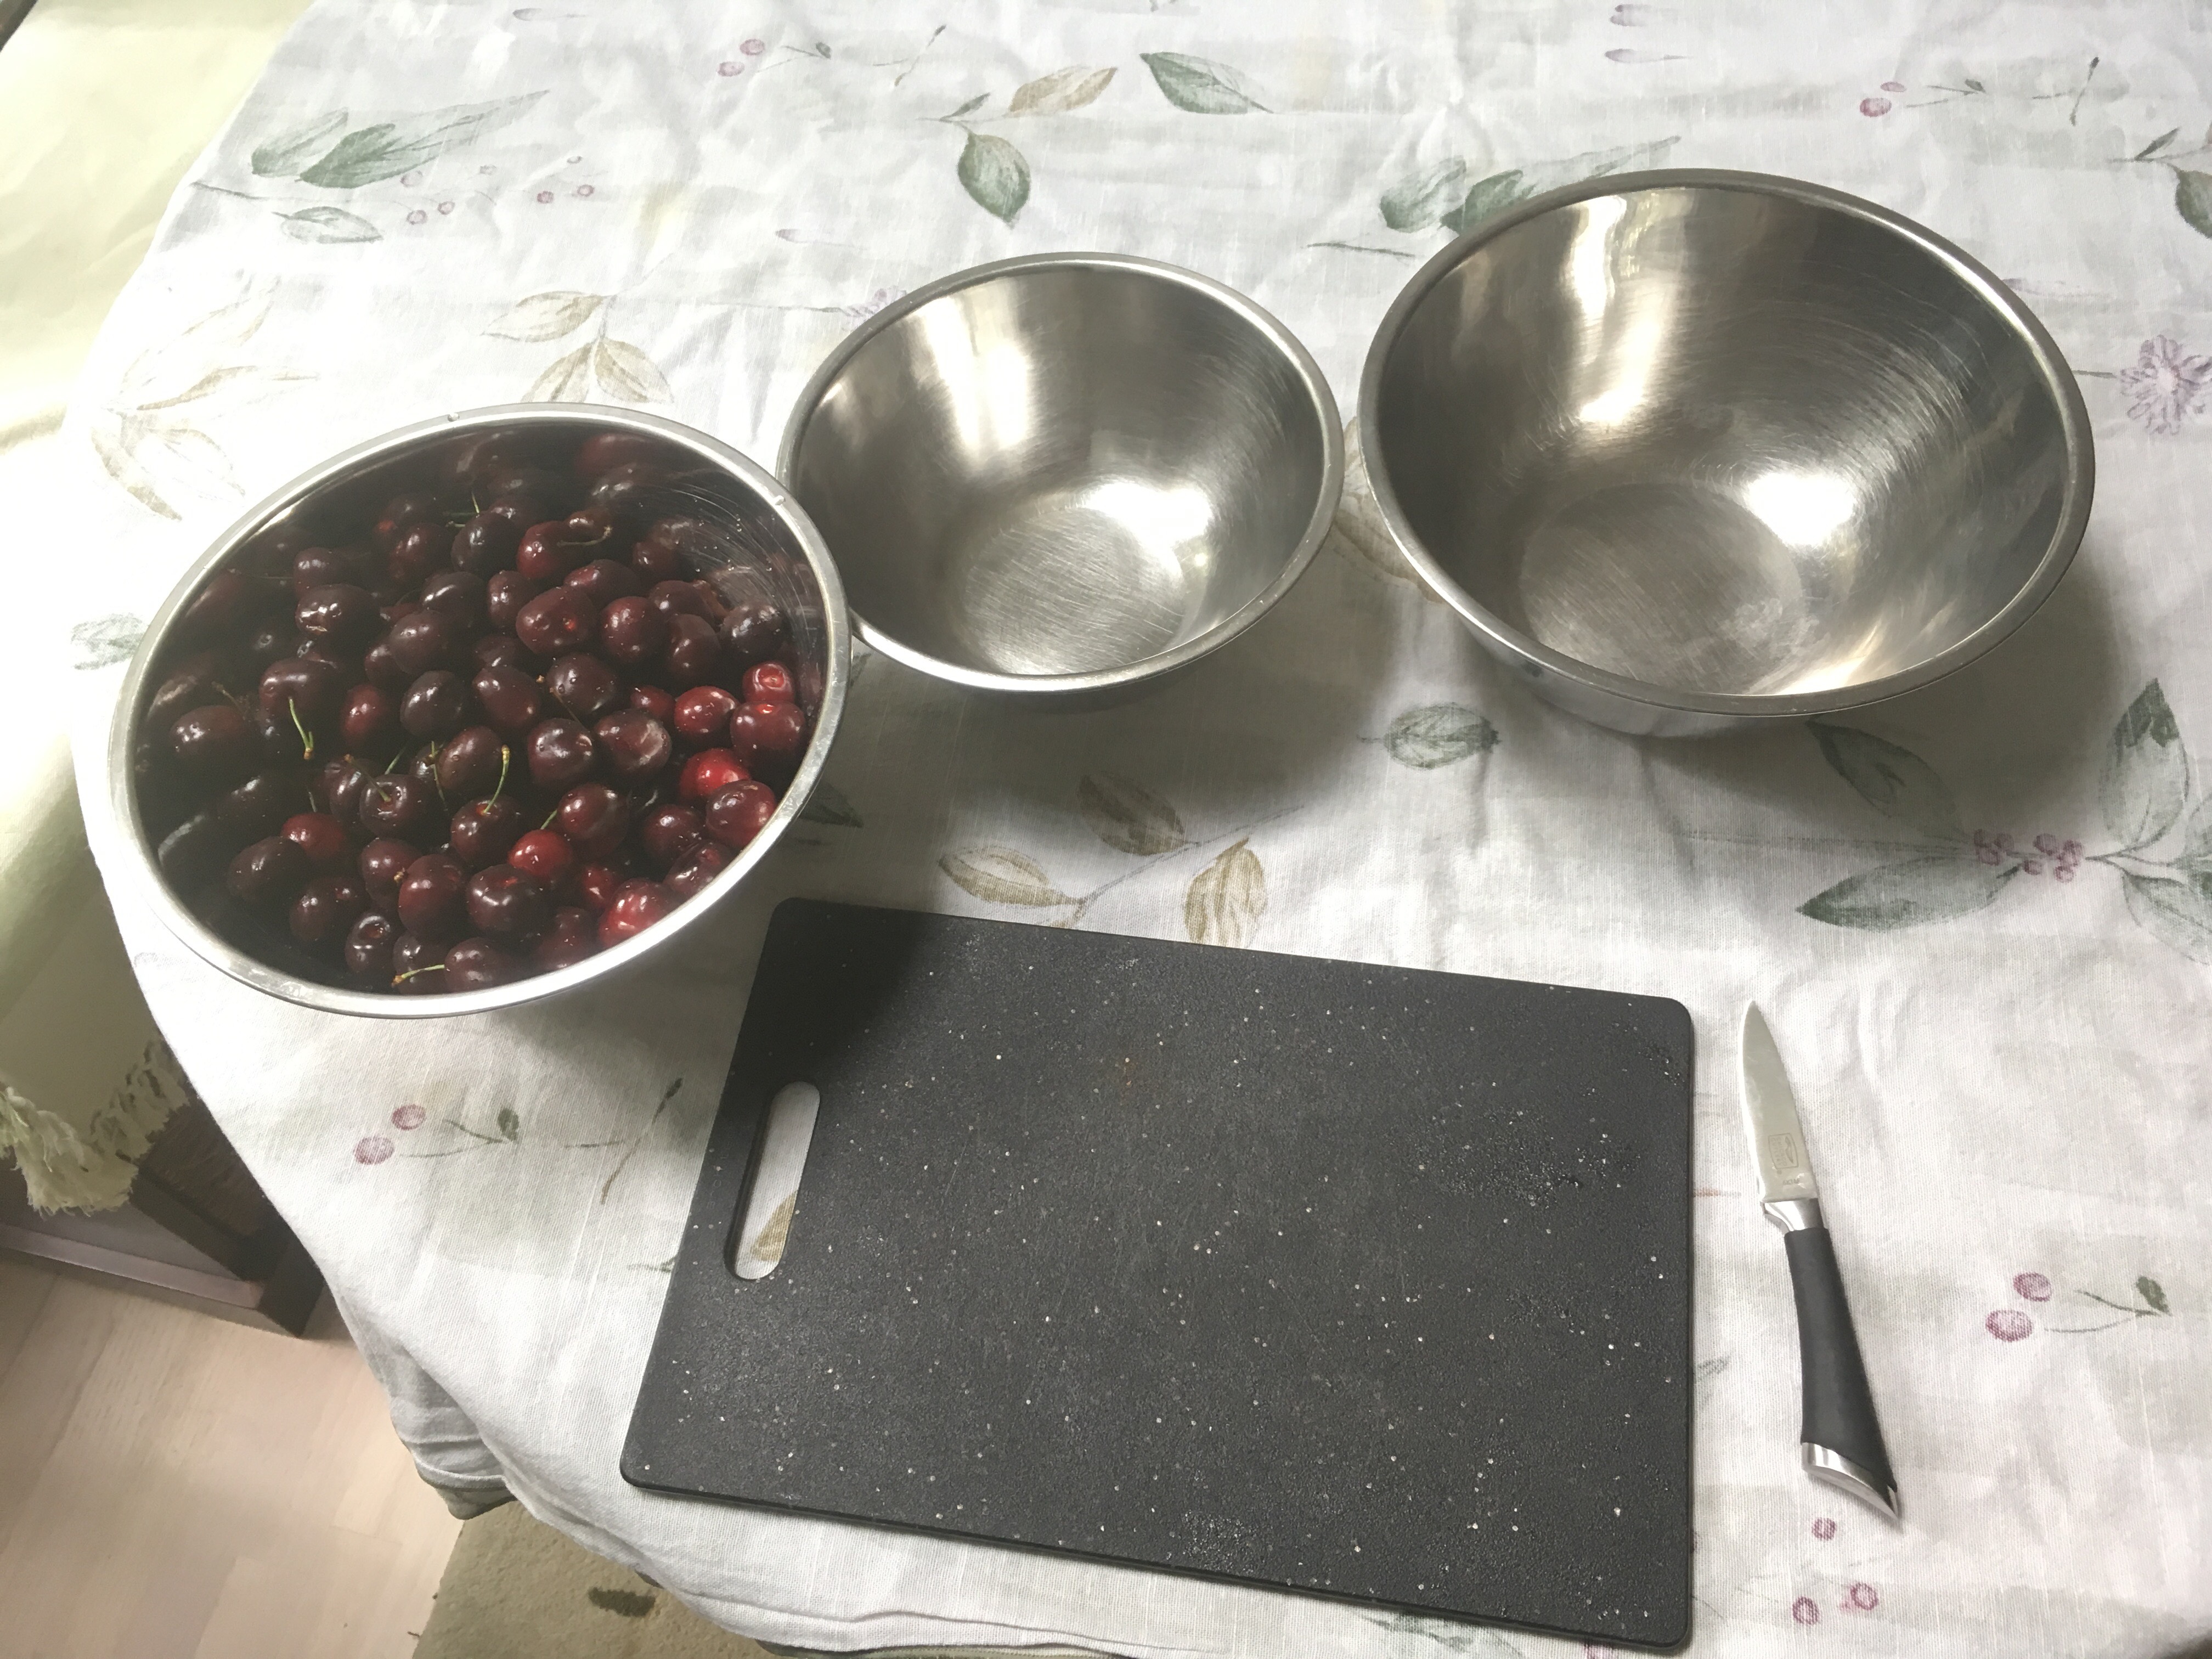 Cherries in a bowl with a knife and board